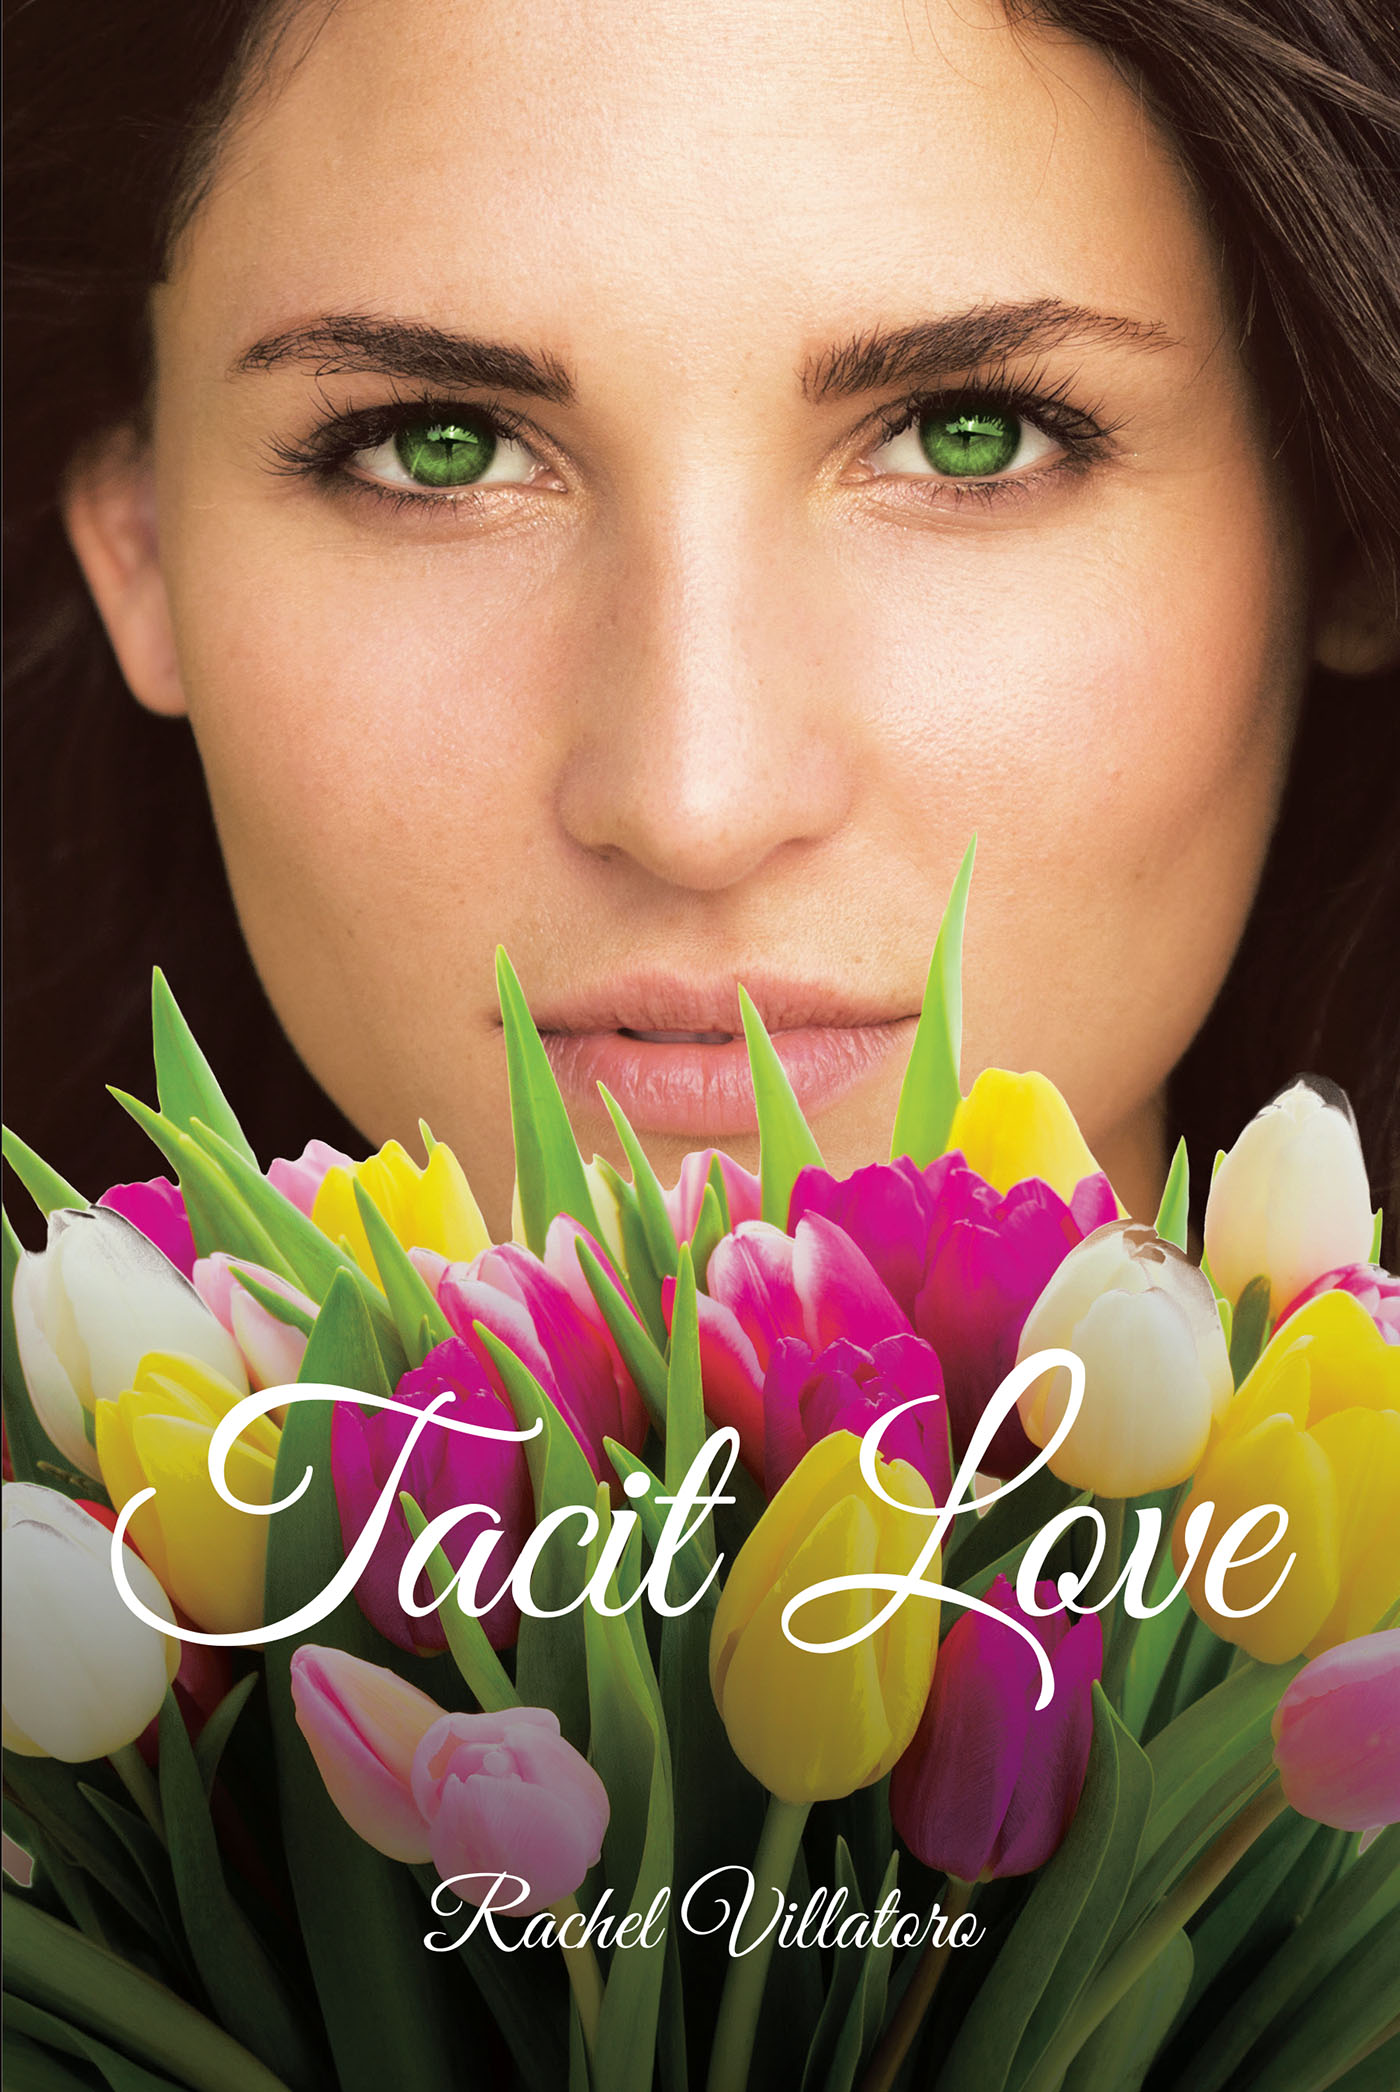 Rachel Villatoro’s Newly Released "Tacit Love: Book One" Brings Readers a Moving Tale of Heartbreak and Unexpected Connections